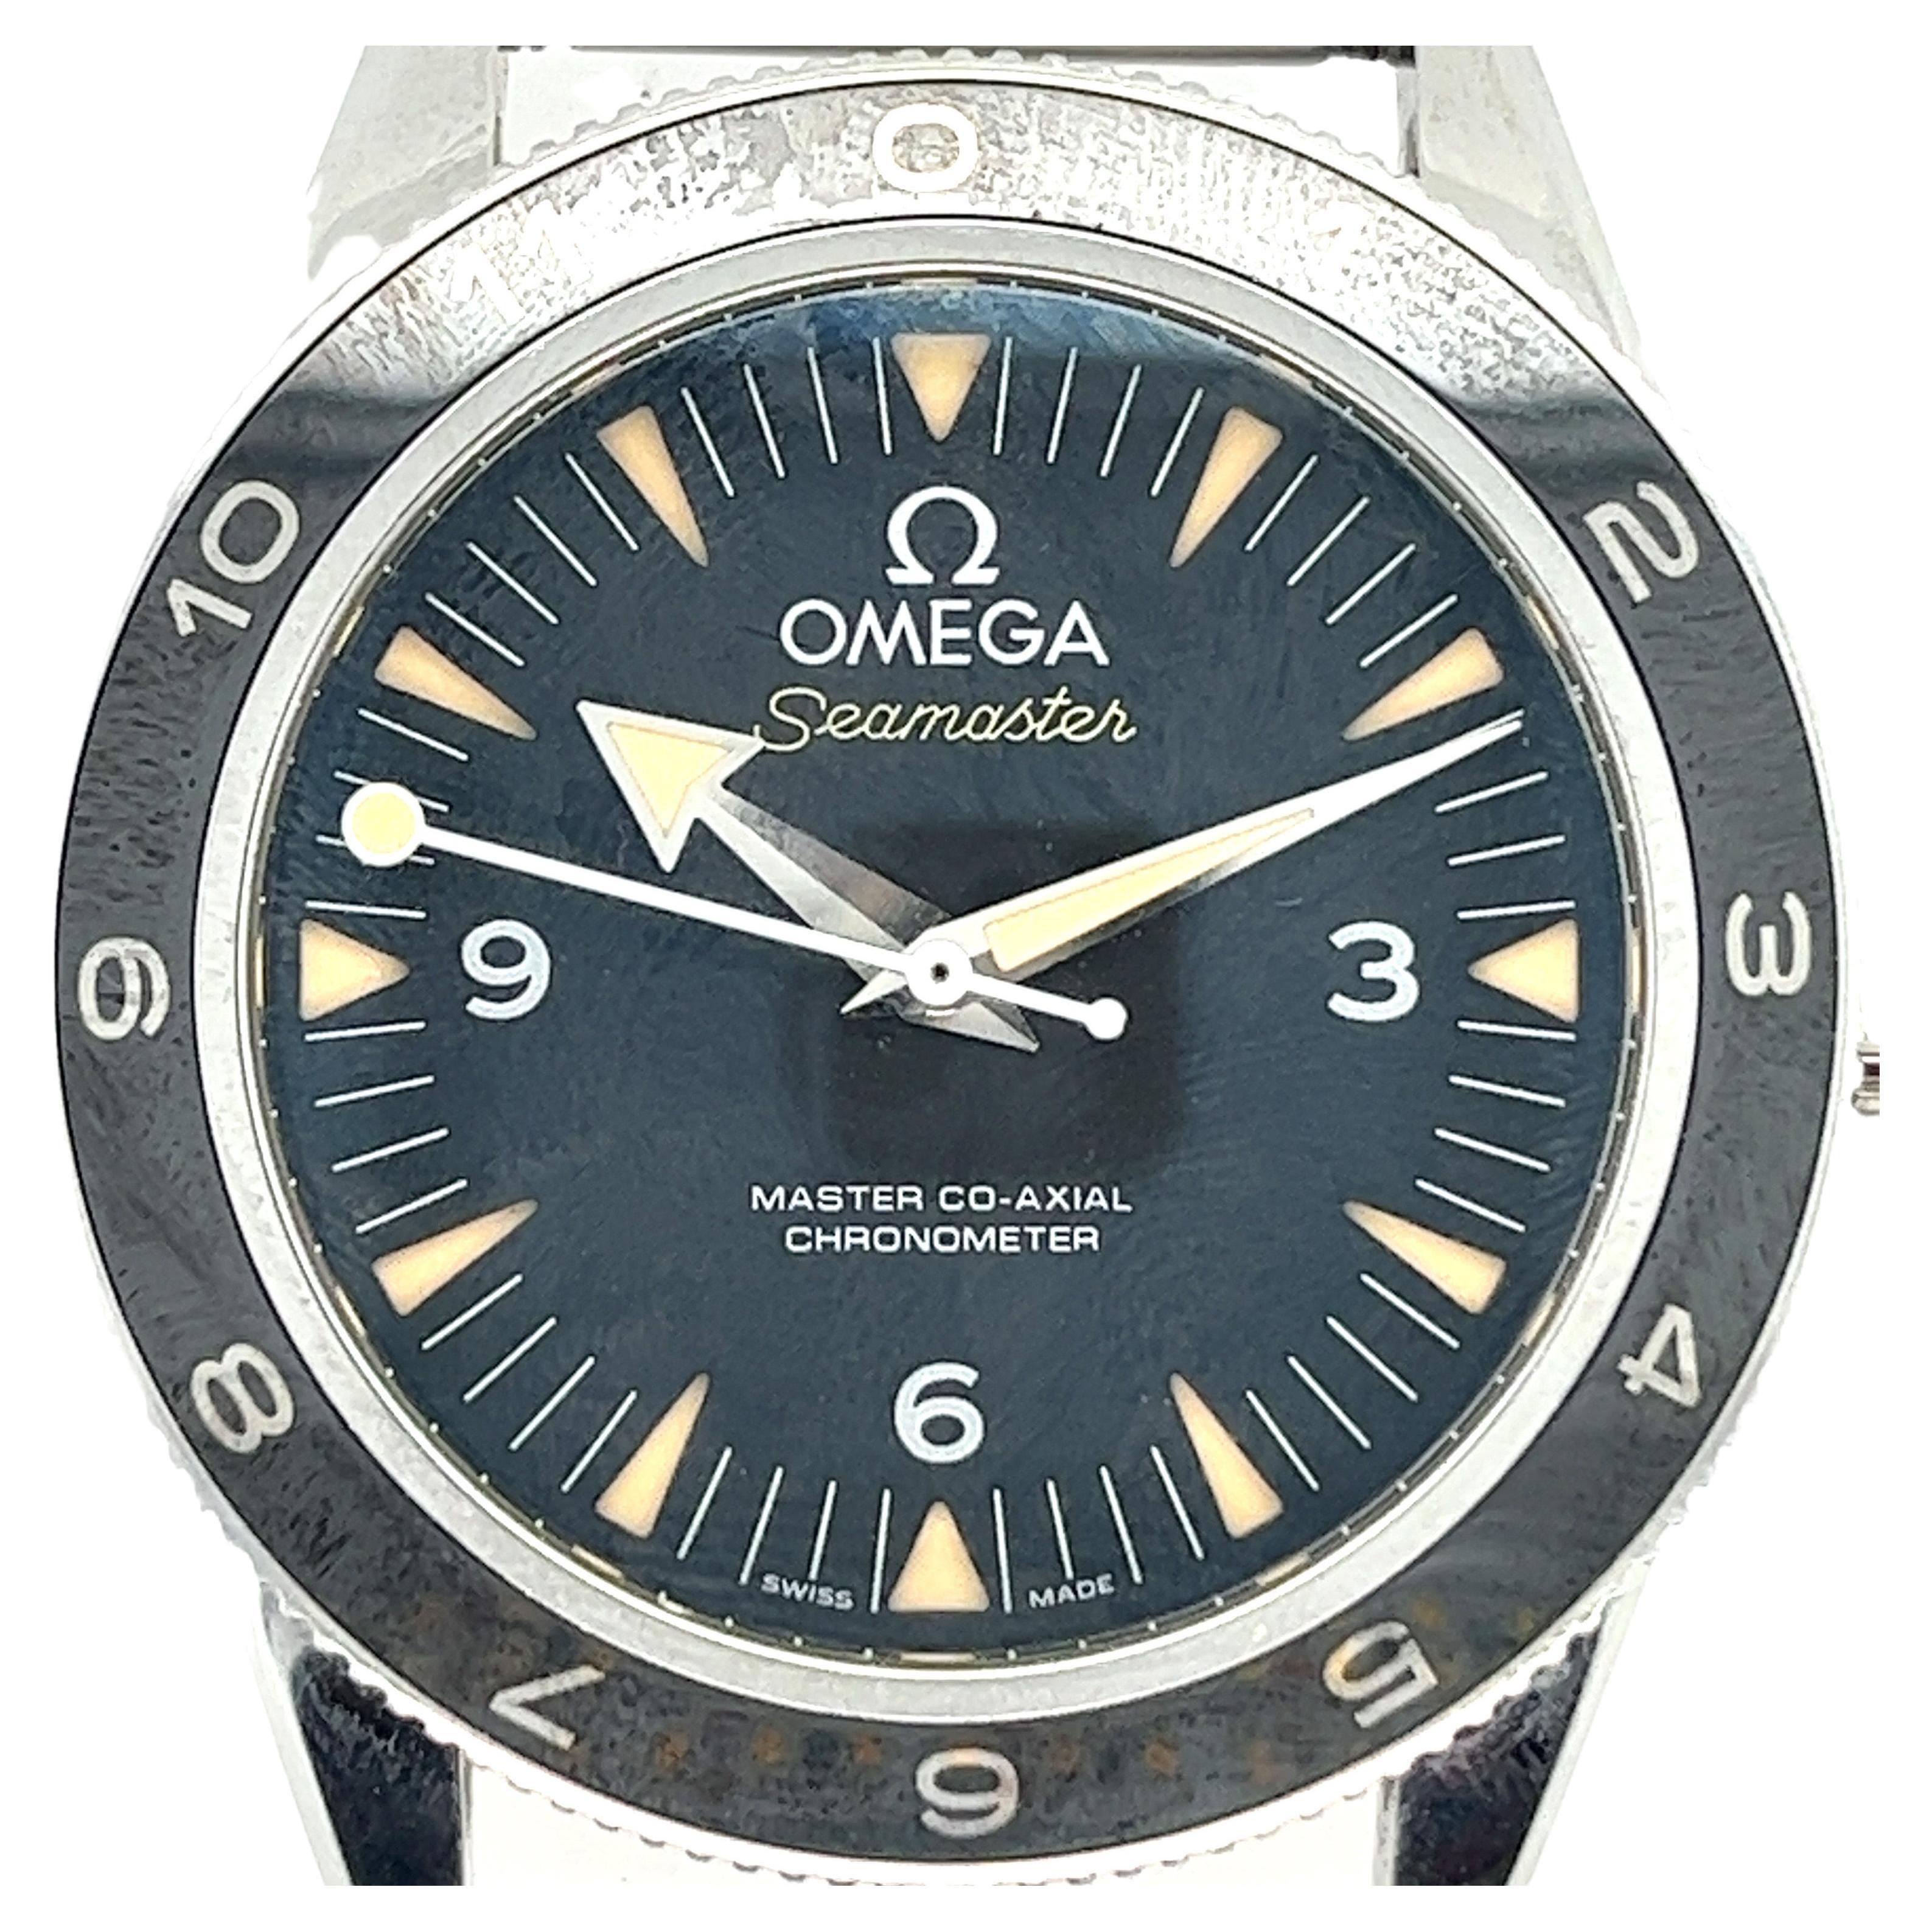 Omega Seamaster 300 Limited Edition Spectre